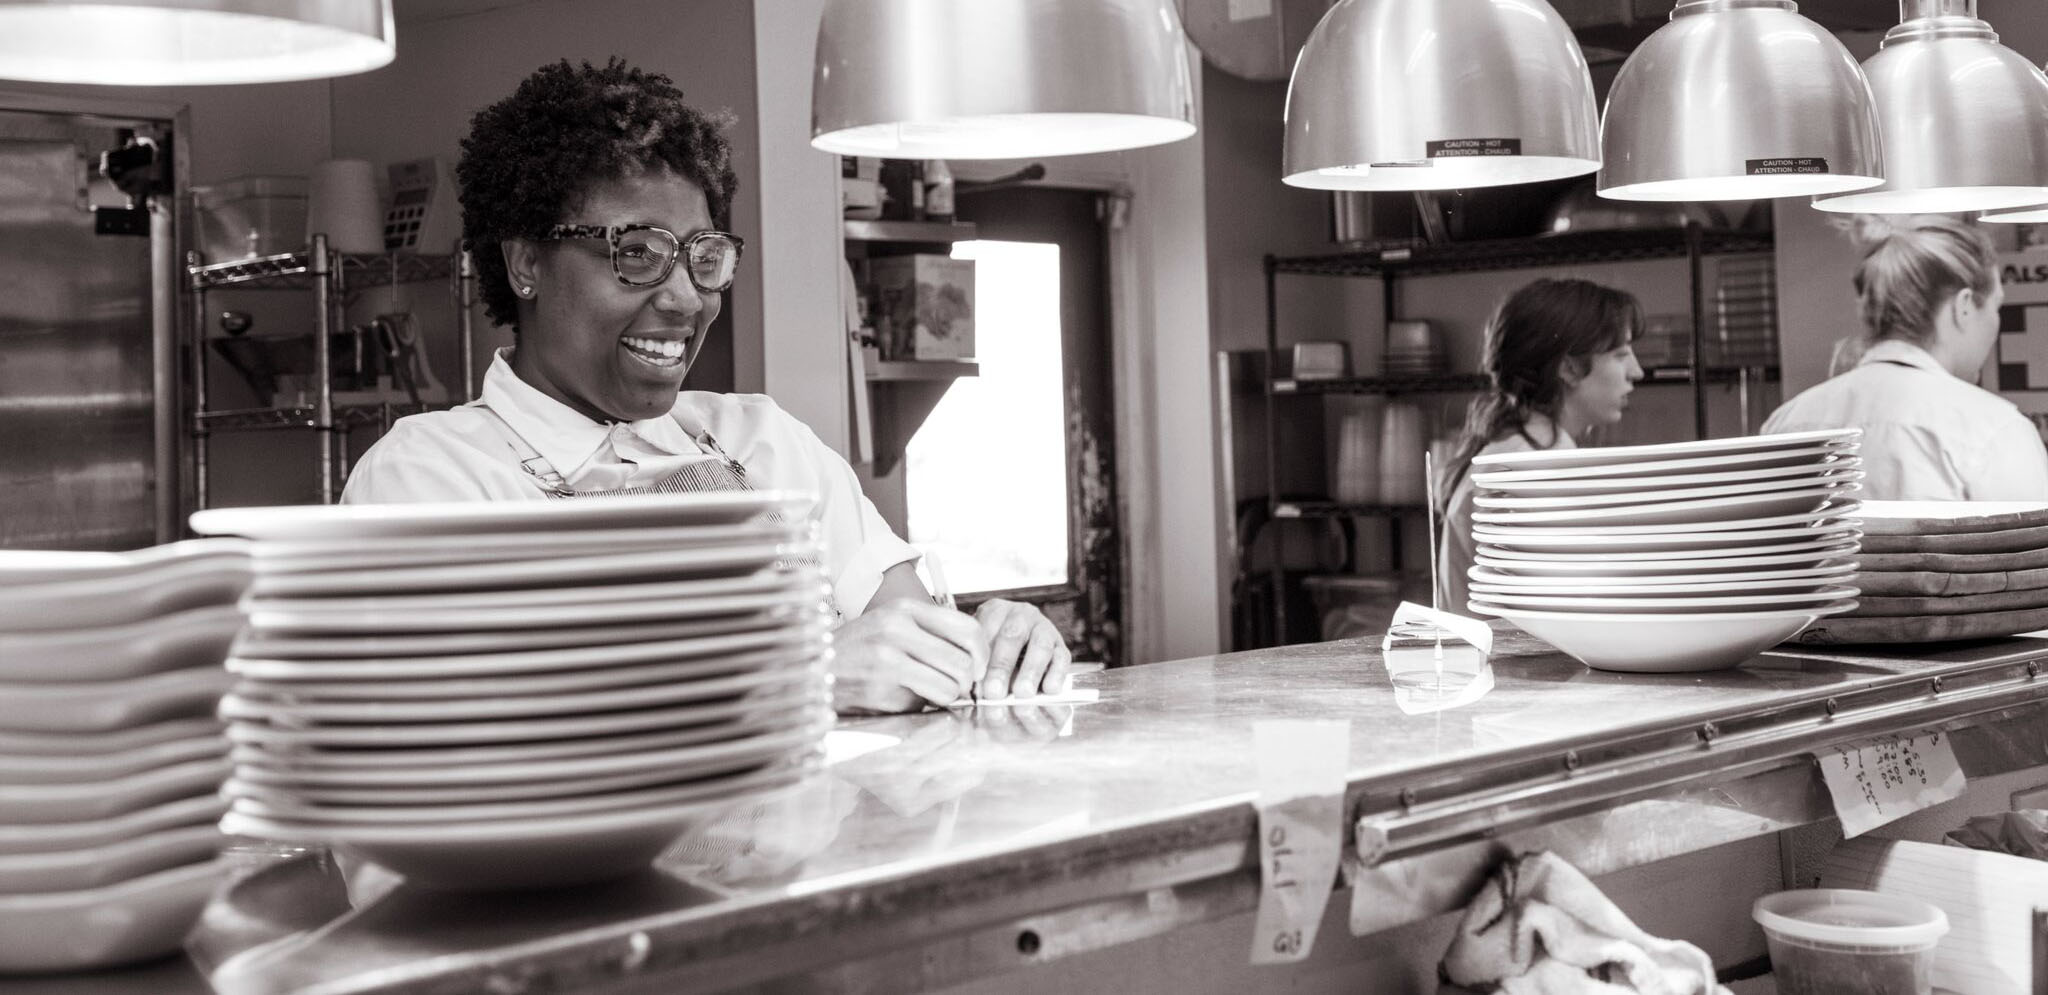 Chef Mashama Bailey smiles while working on the line at a restaurant